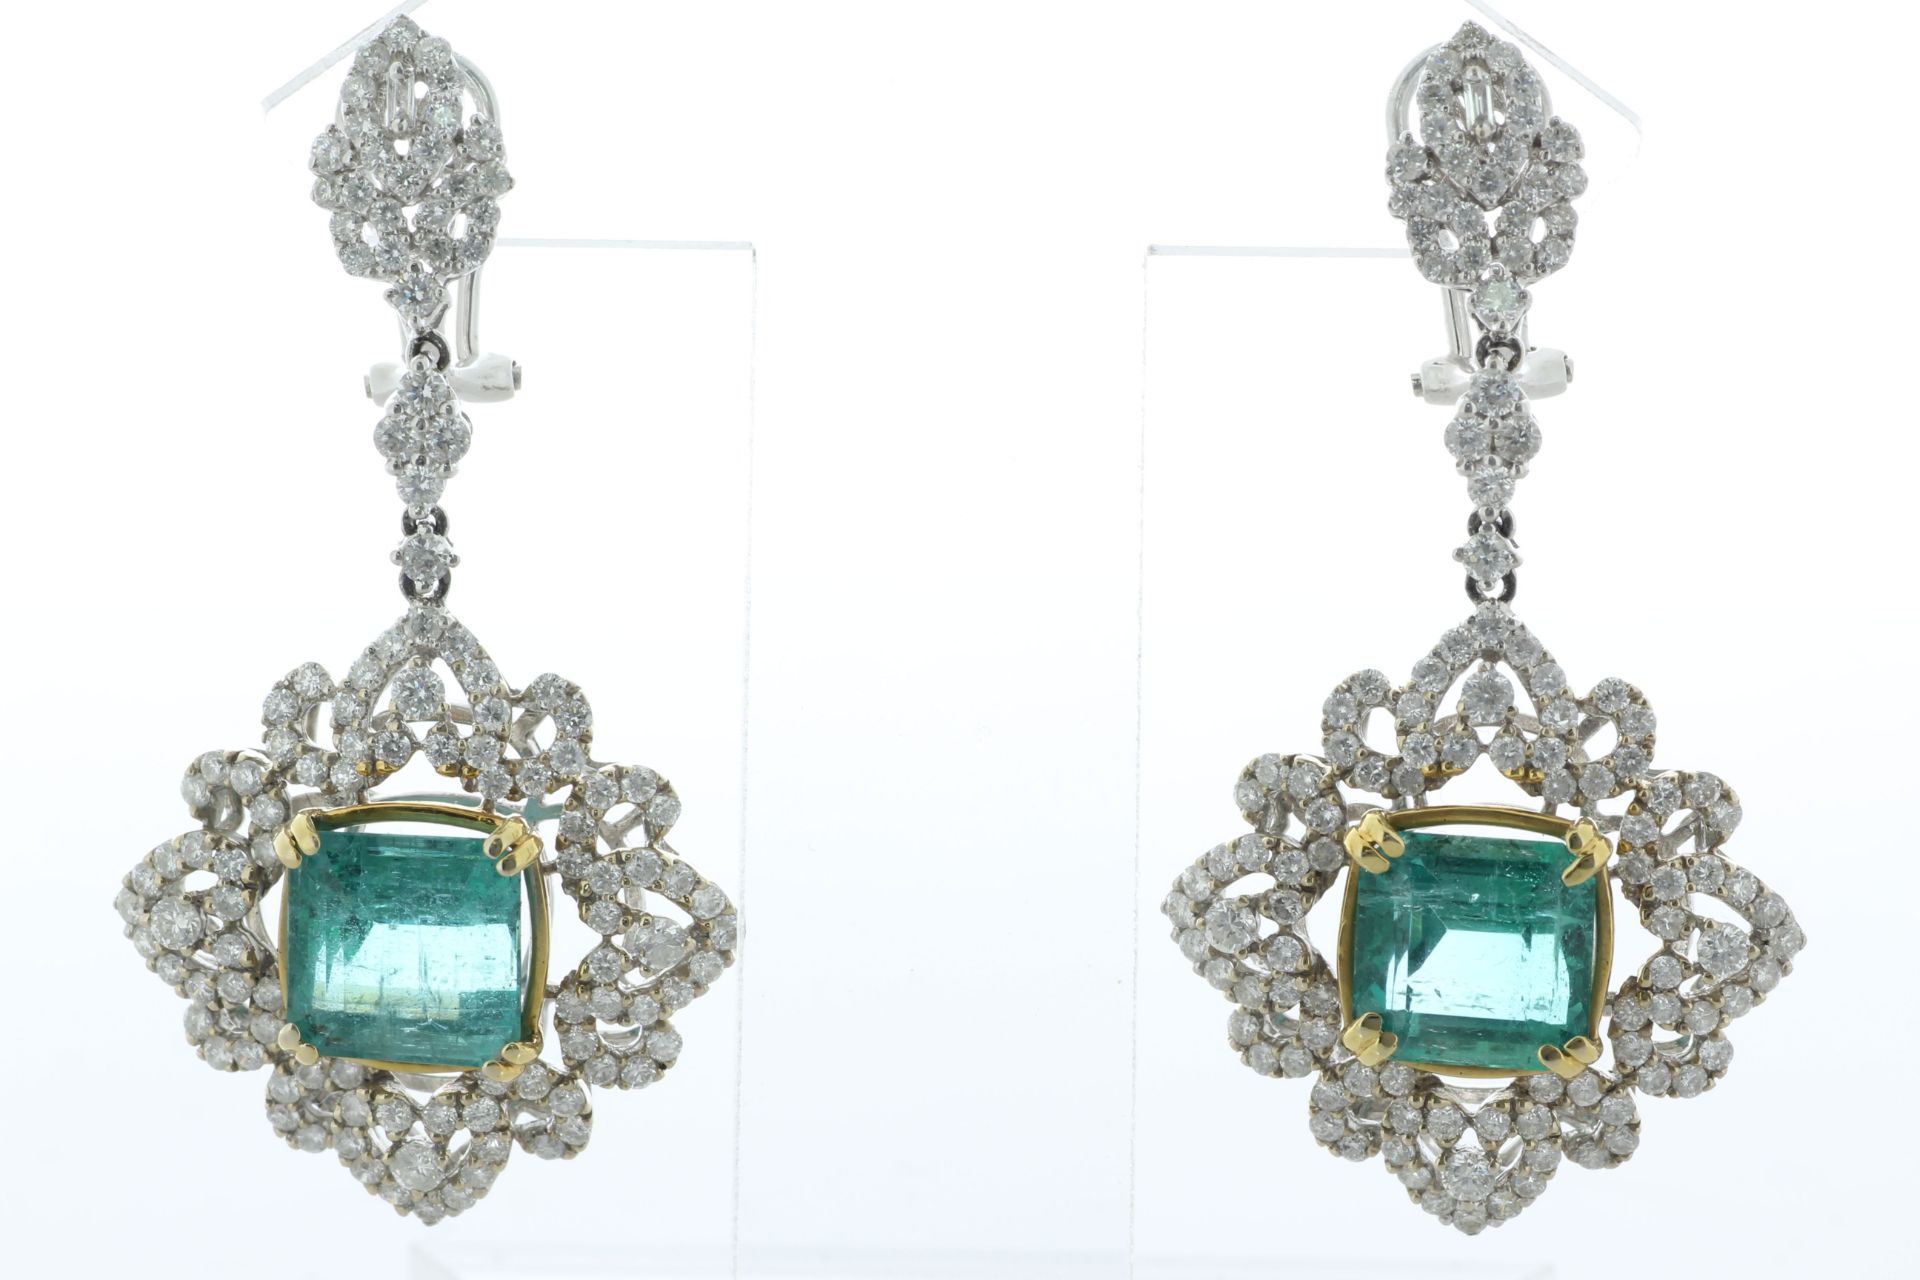 18ct White Gold Emerald Cluster Diamond and Emerald Earrings (E7.52) 3.01 Carats - Image 2 of 3